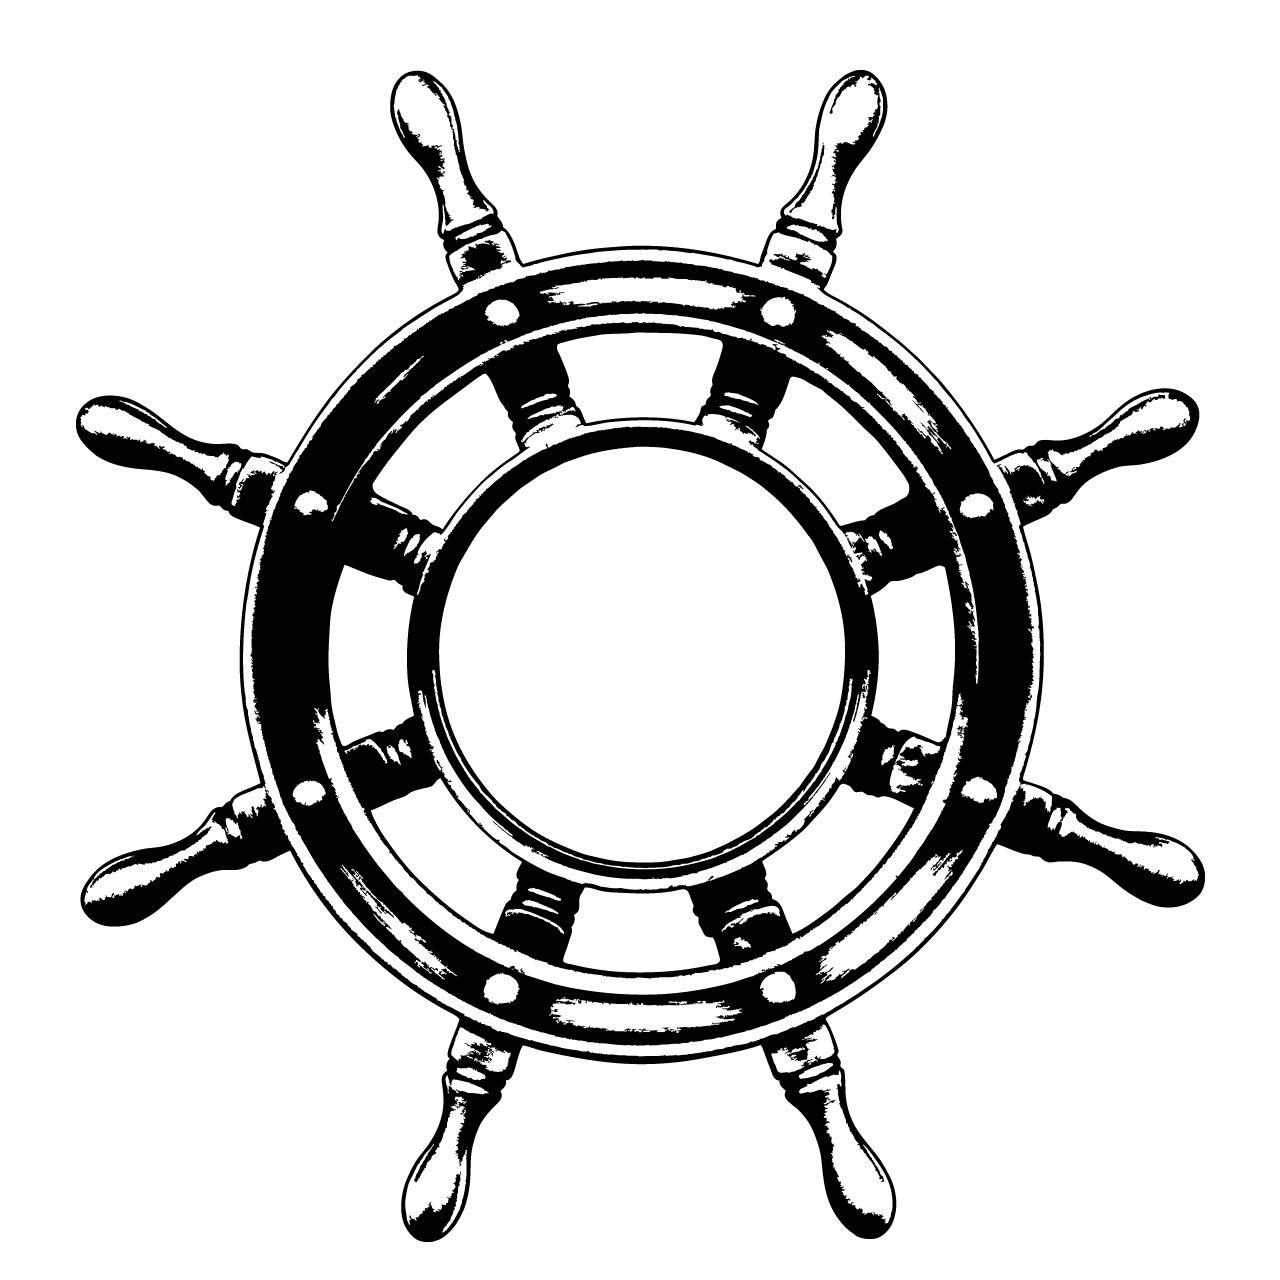 Details about SHIPS WHEEL PIRATE WALL STICKER DECAL ART